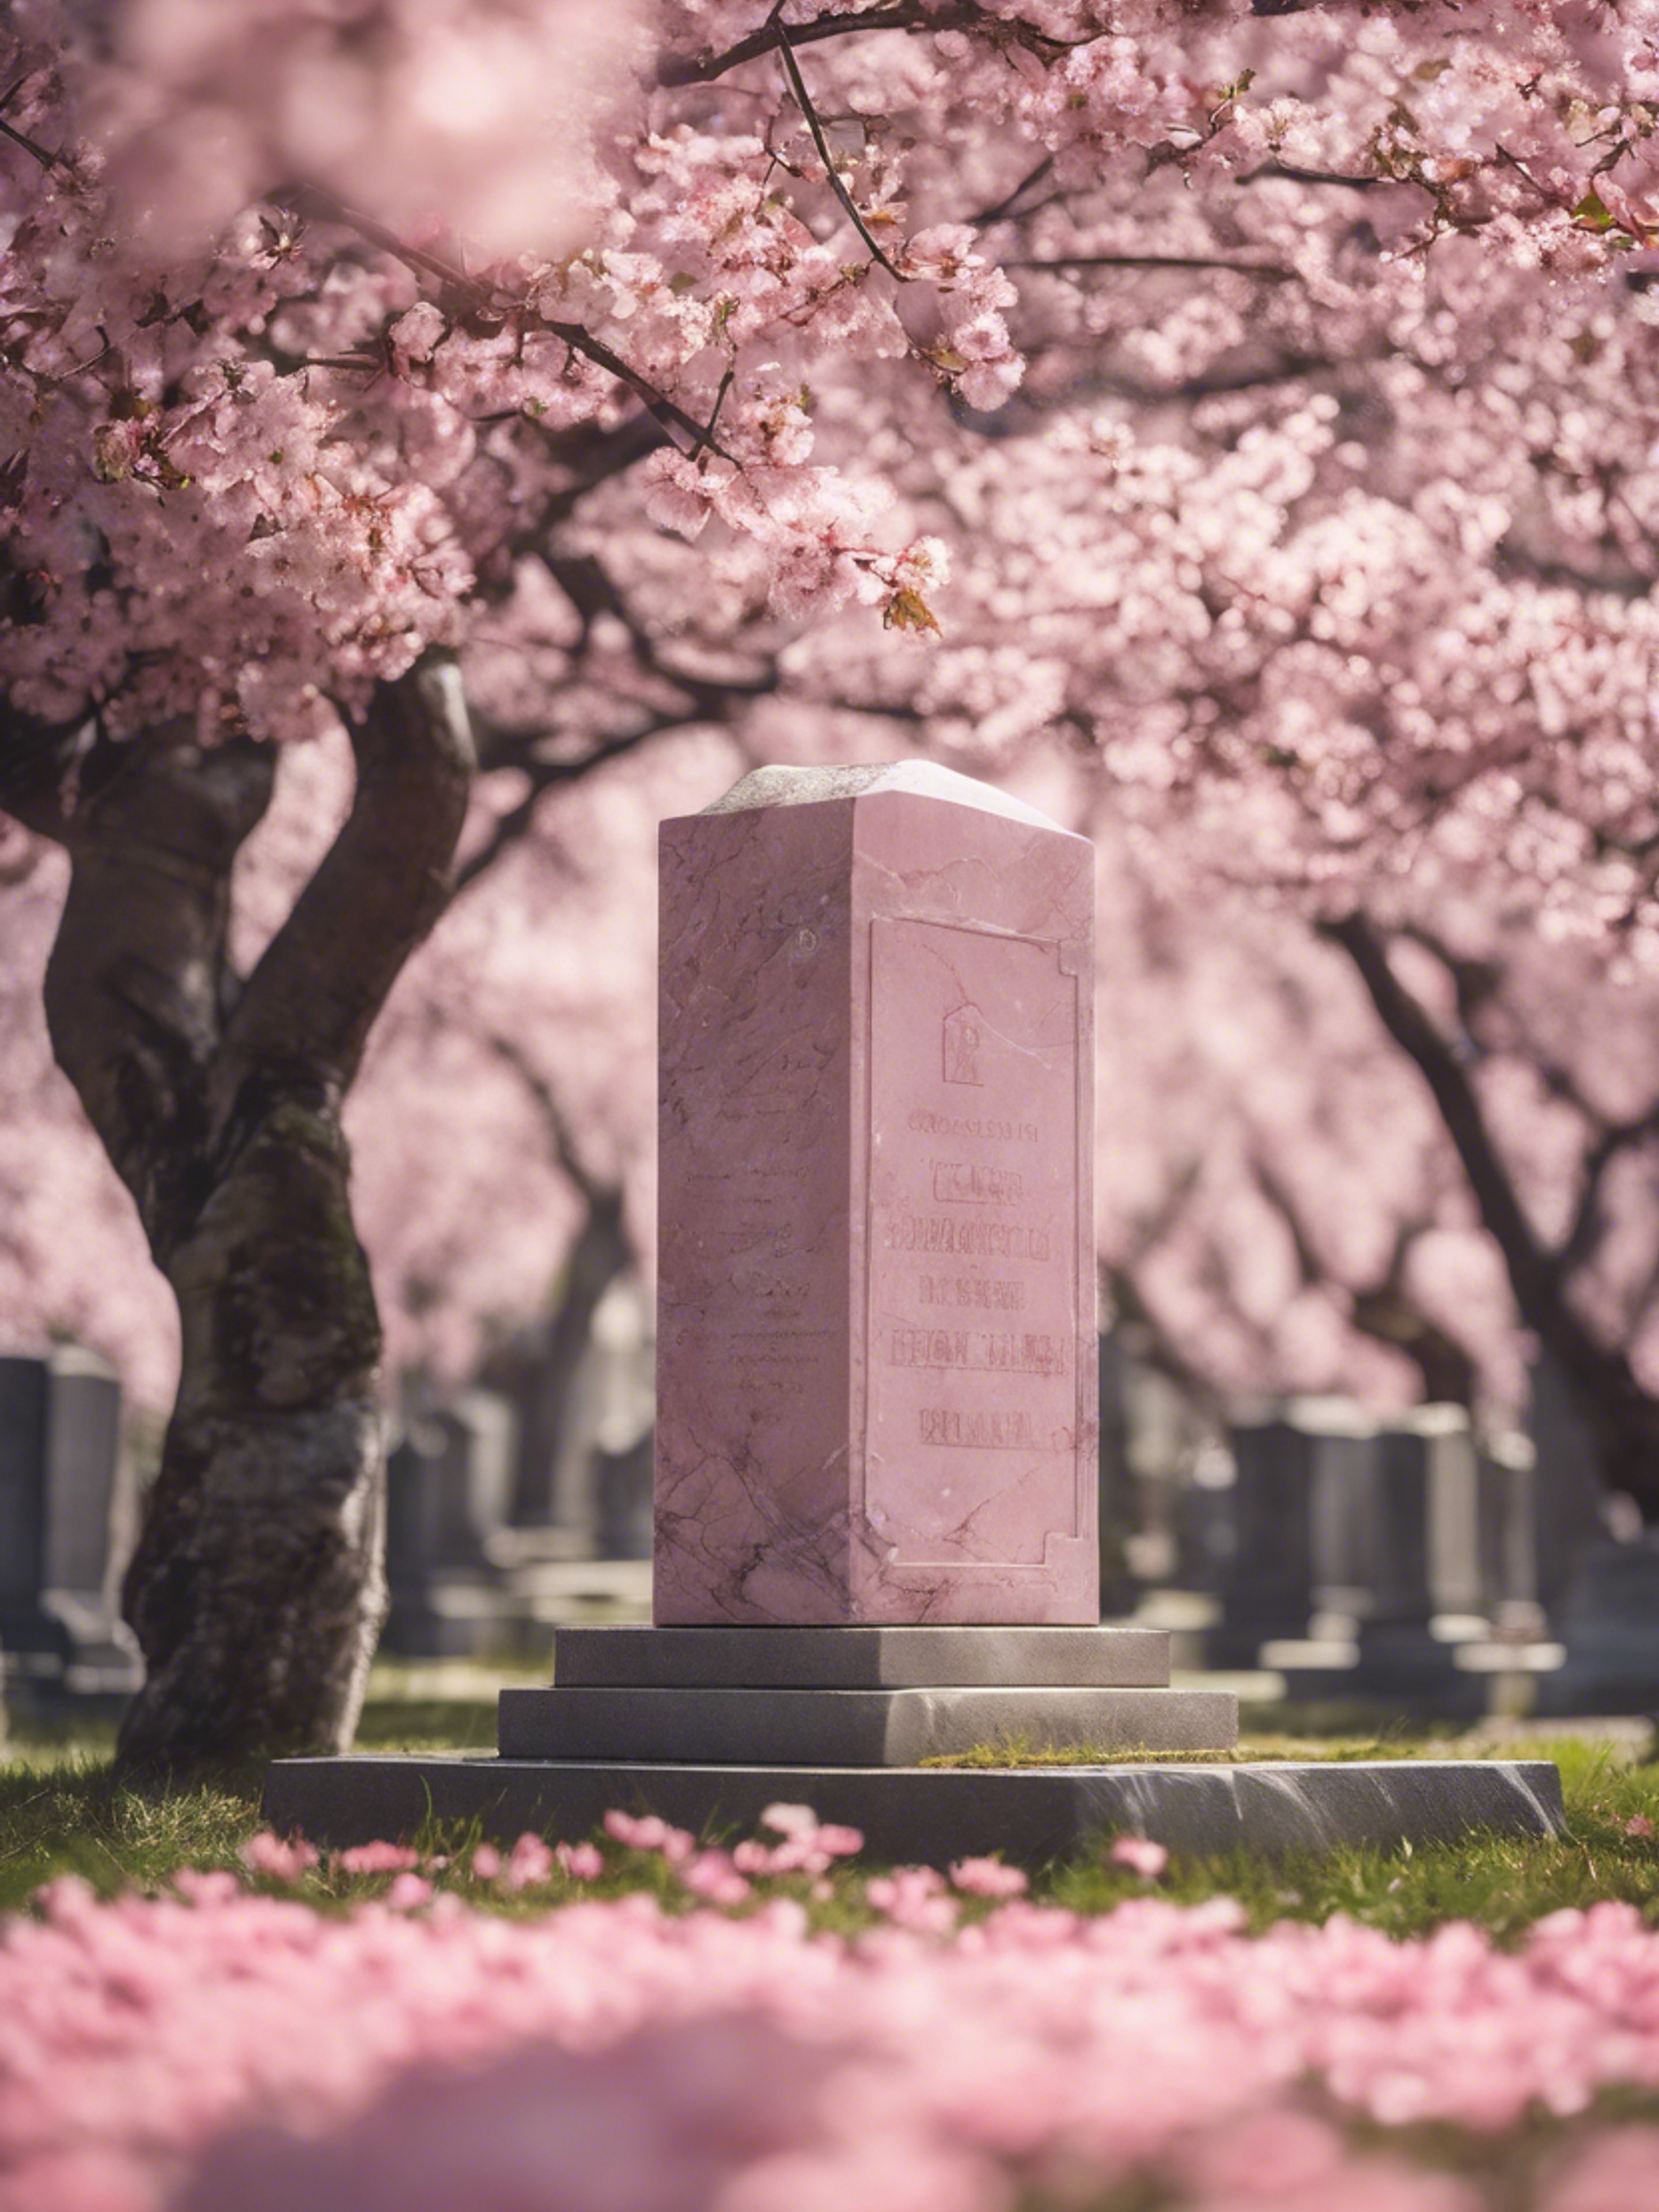 Pink marble headstone surrounded by blooming cherry blossom trees in a tranquil cemetery. Tapeta[6605d21f56504ecfad88]